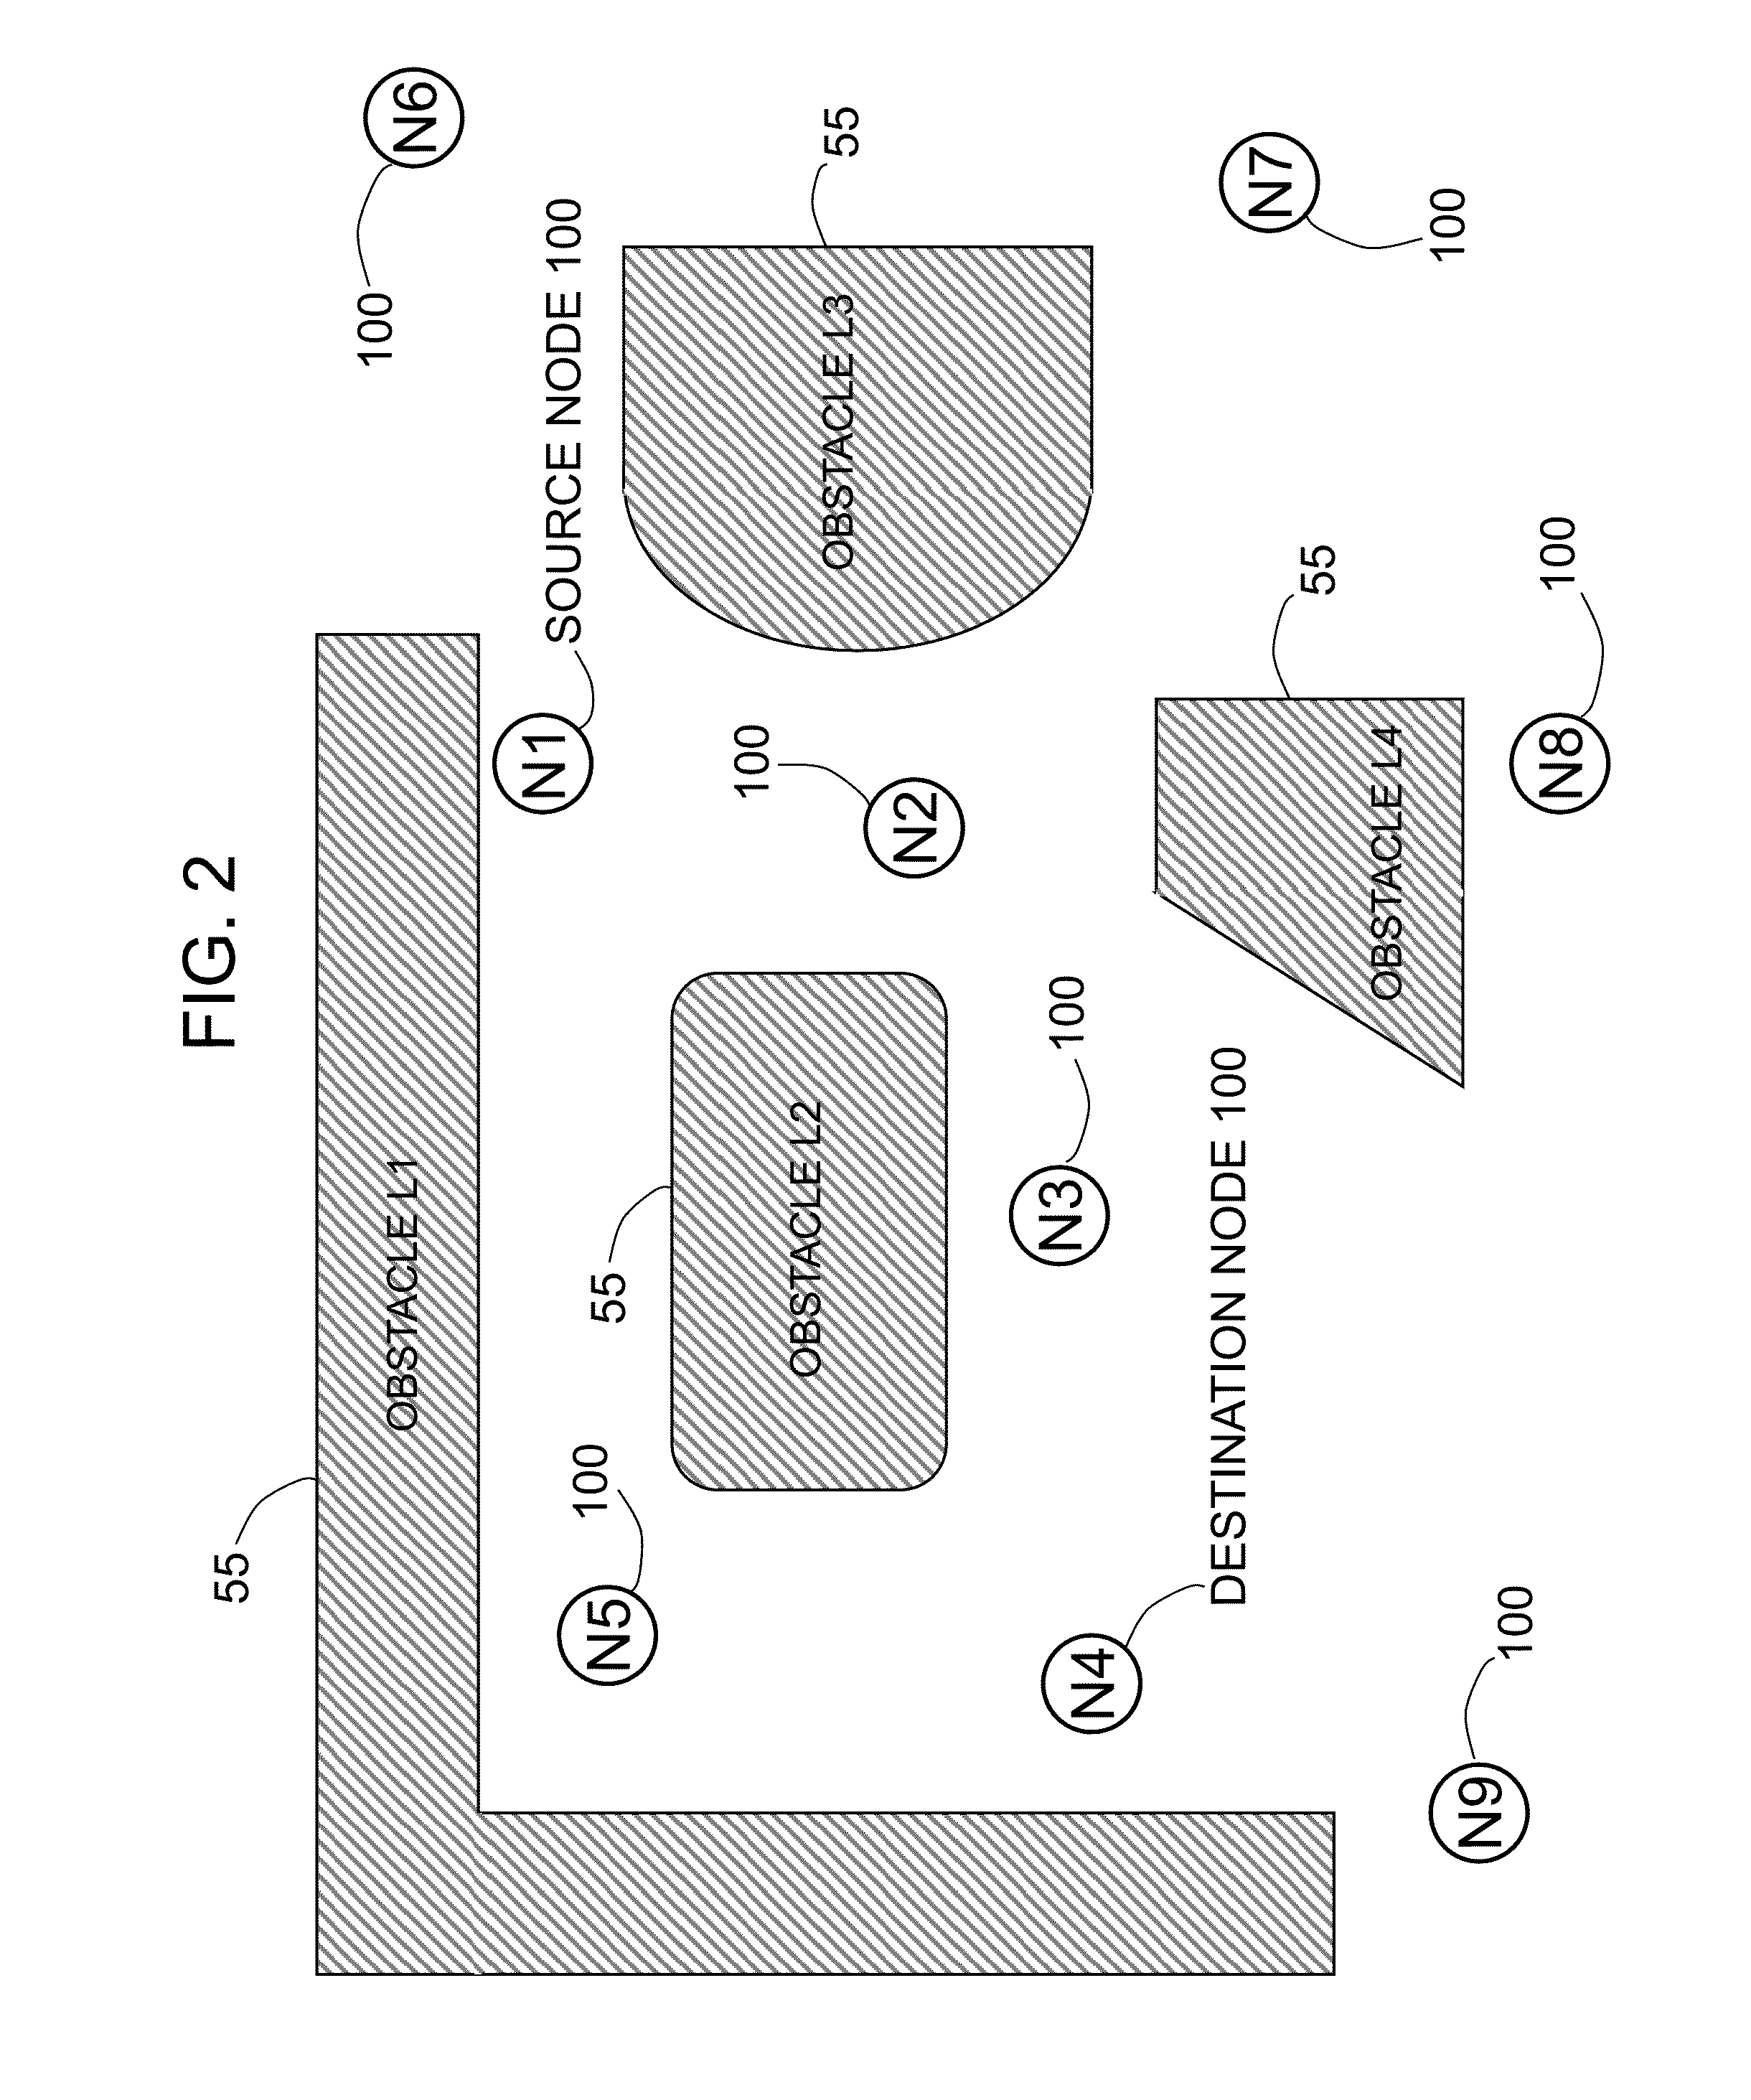 Active-avoidance-based routing in a wireless ad hoc network